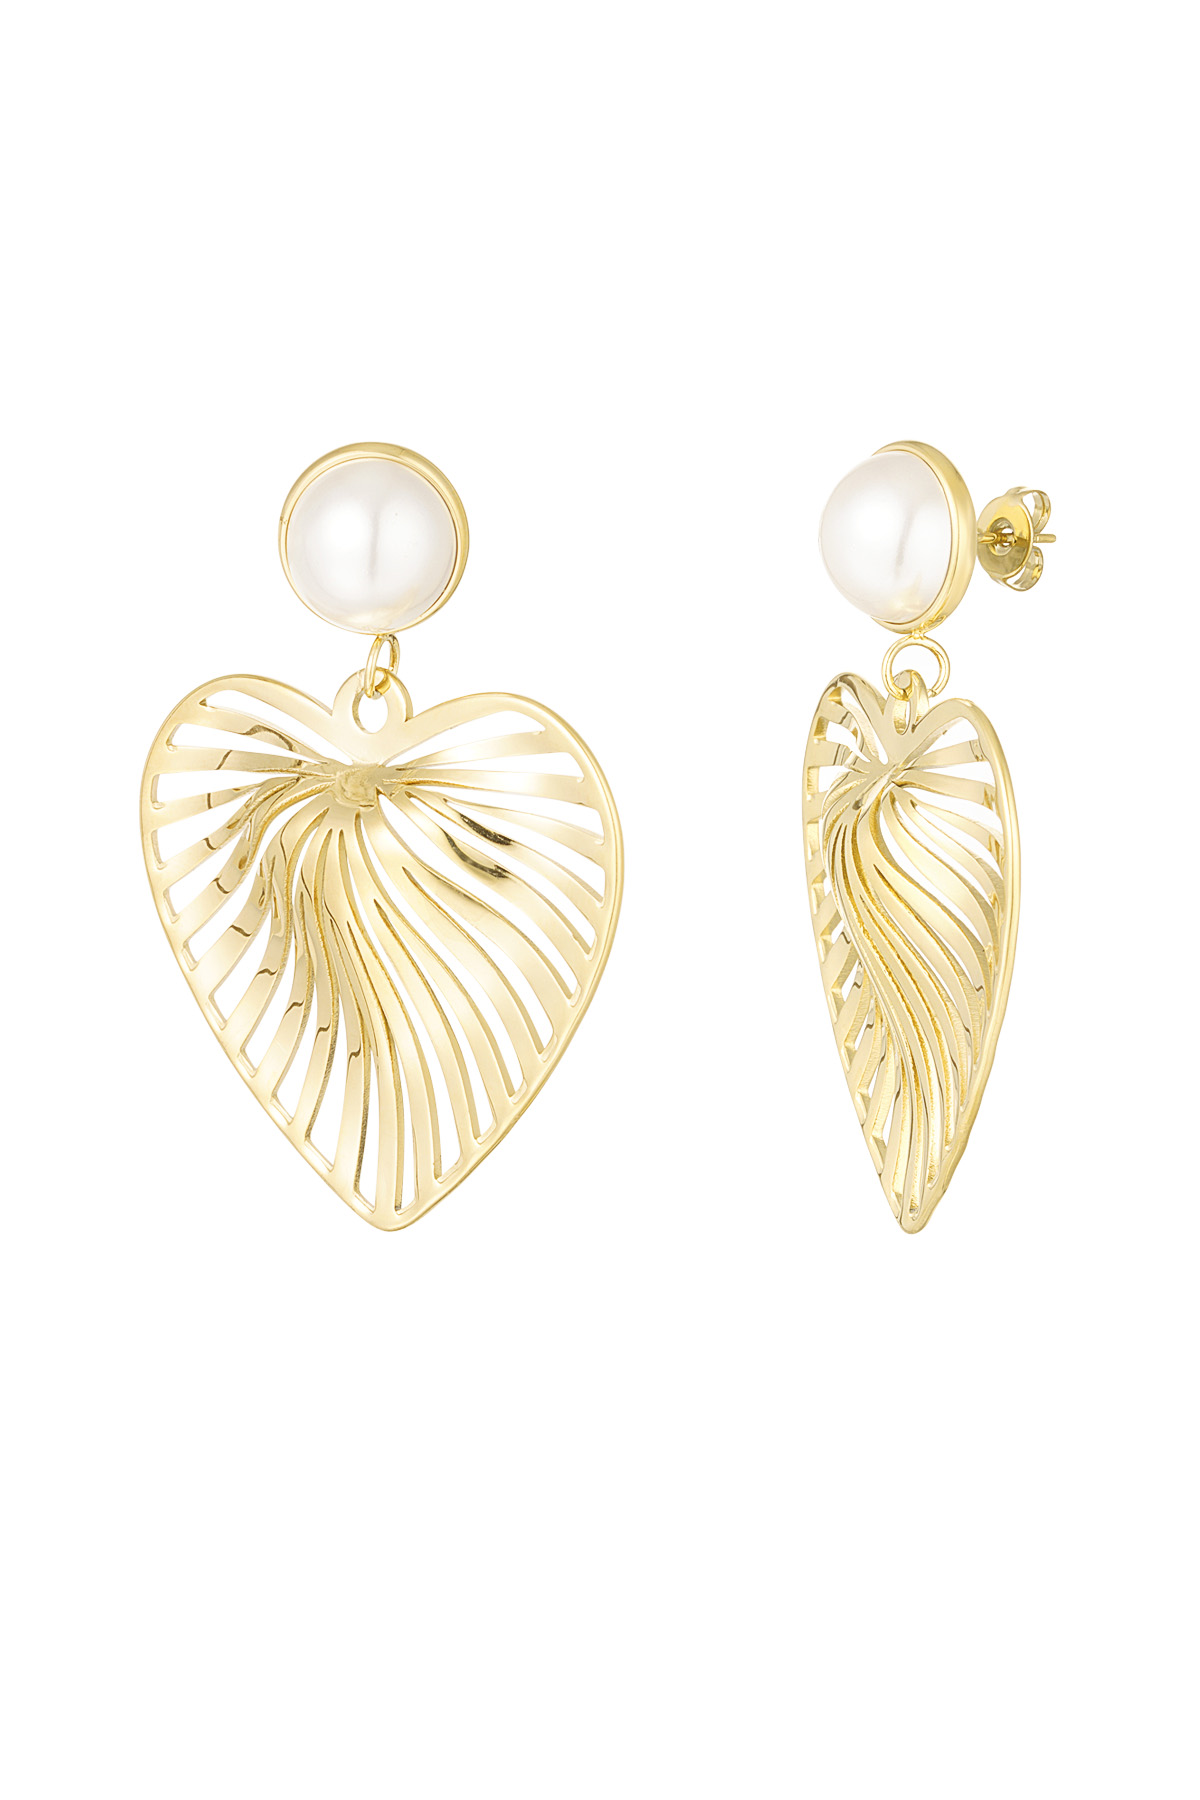 Earrings heart with pearl - gold 